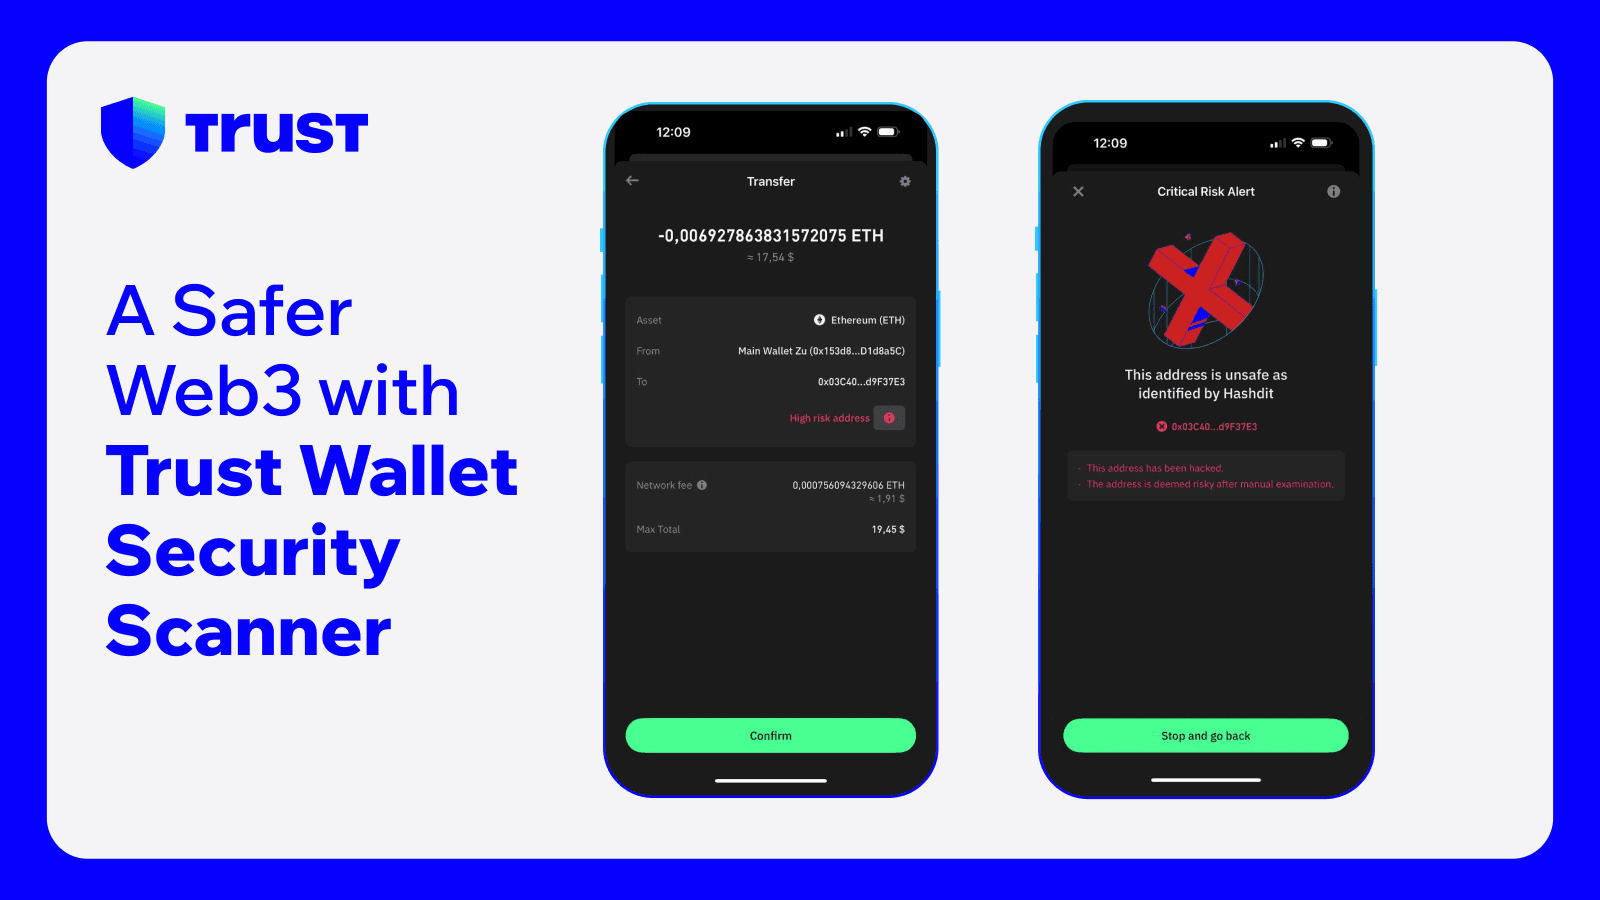 A Safer Web3 Experience with Trust Wallet Security Scanner